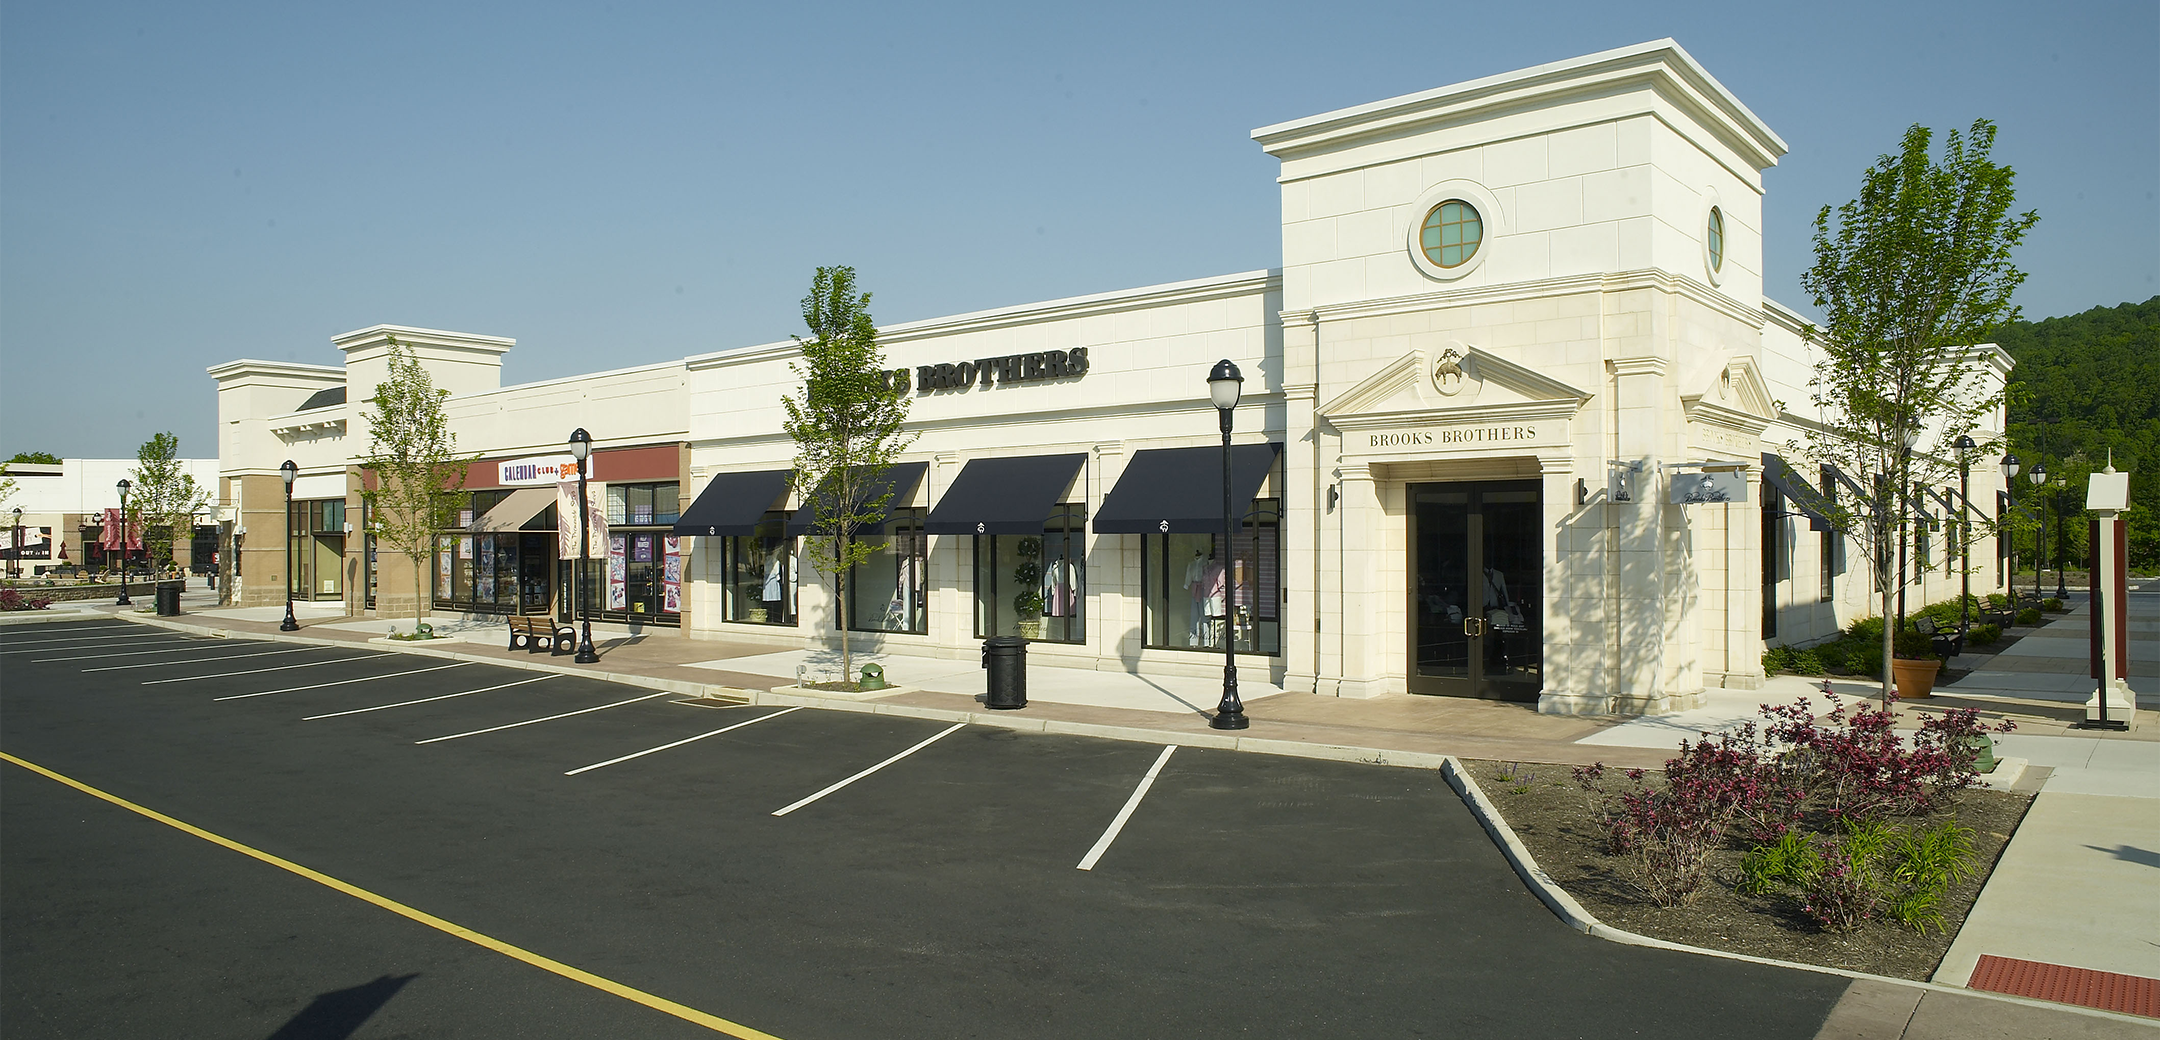 An angled exterior view of the Promenade Saucon Valley building showcasing the storefronts front parking and store logos above the entrances with navy overhangs.